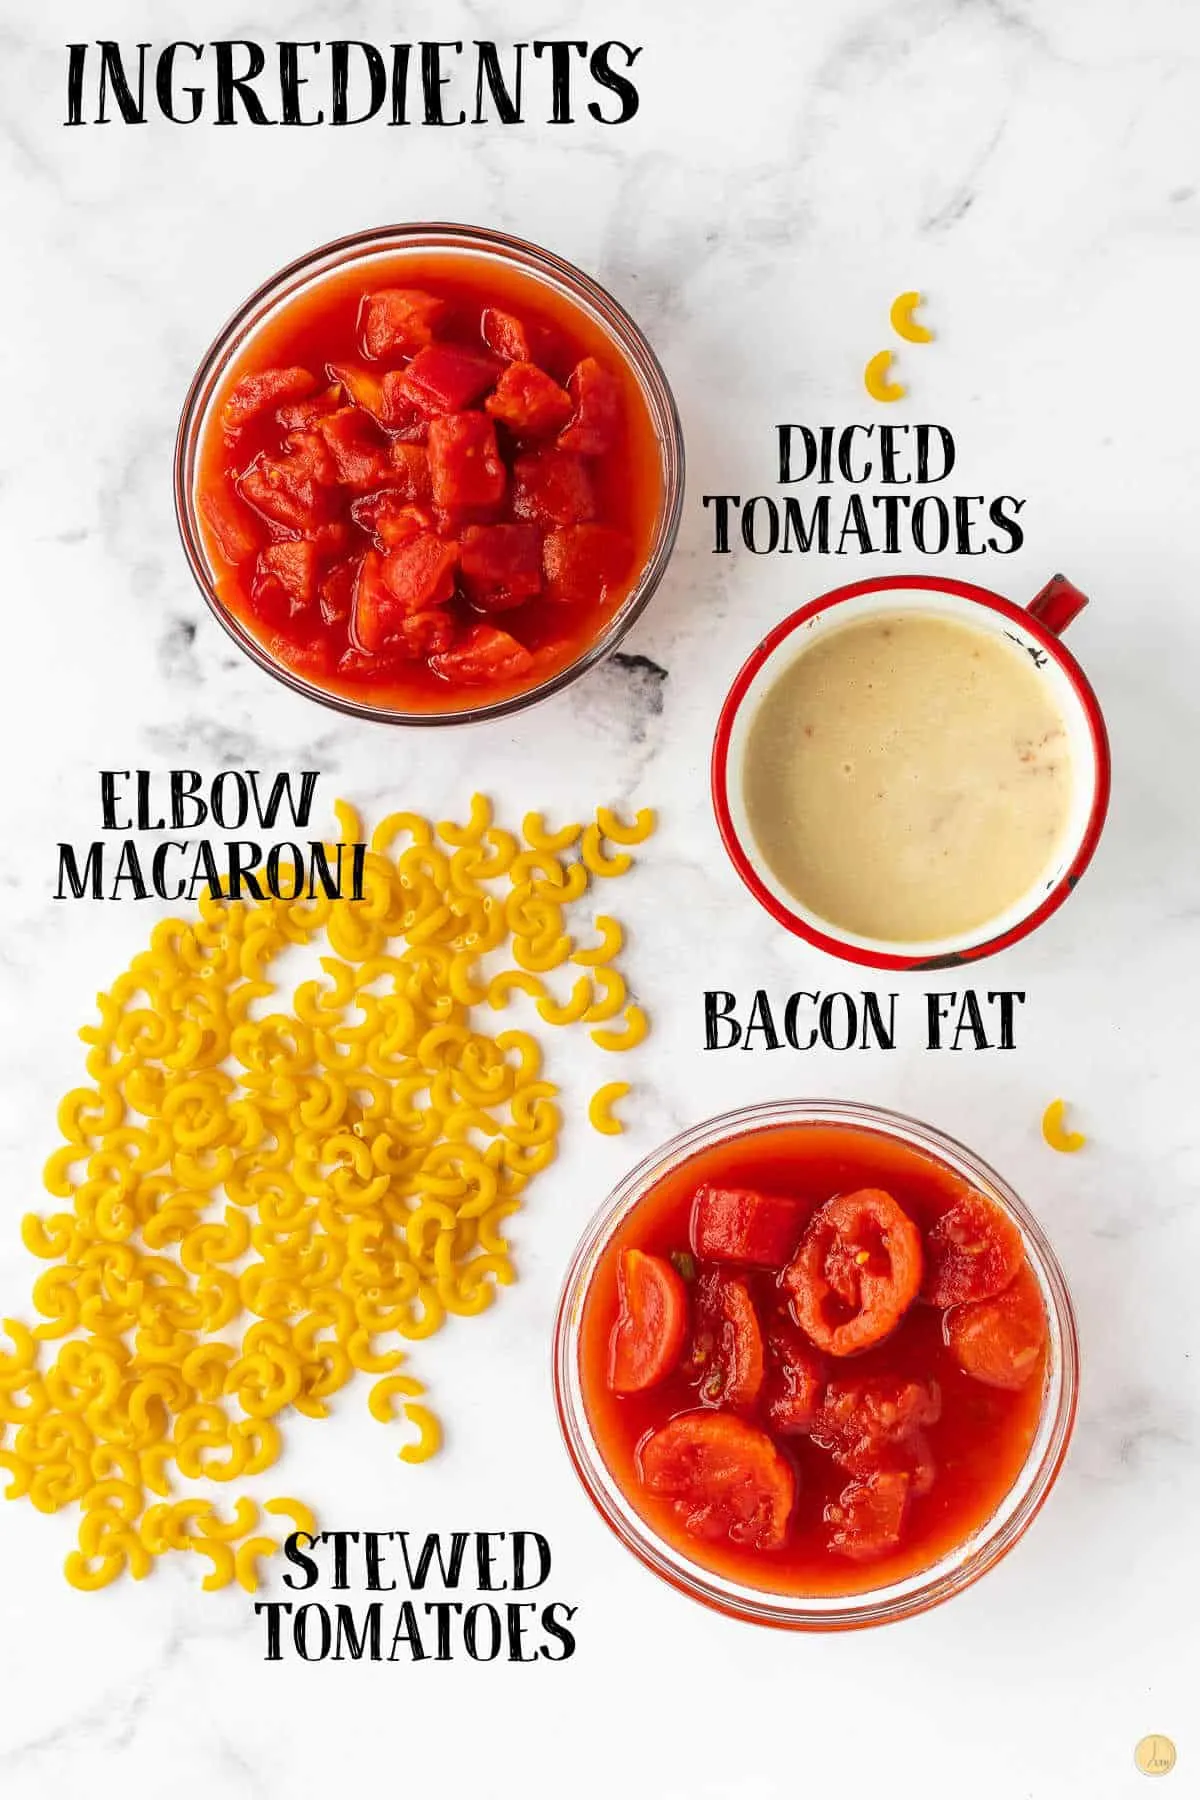 labeled picture of tomatoes and macaroni